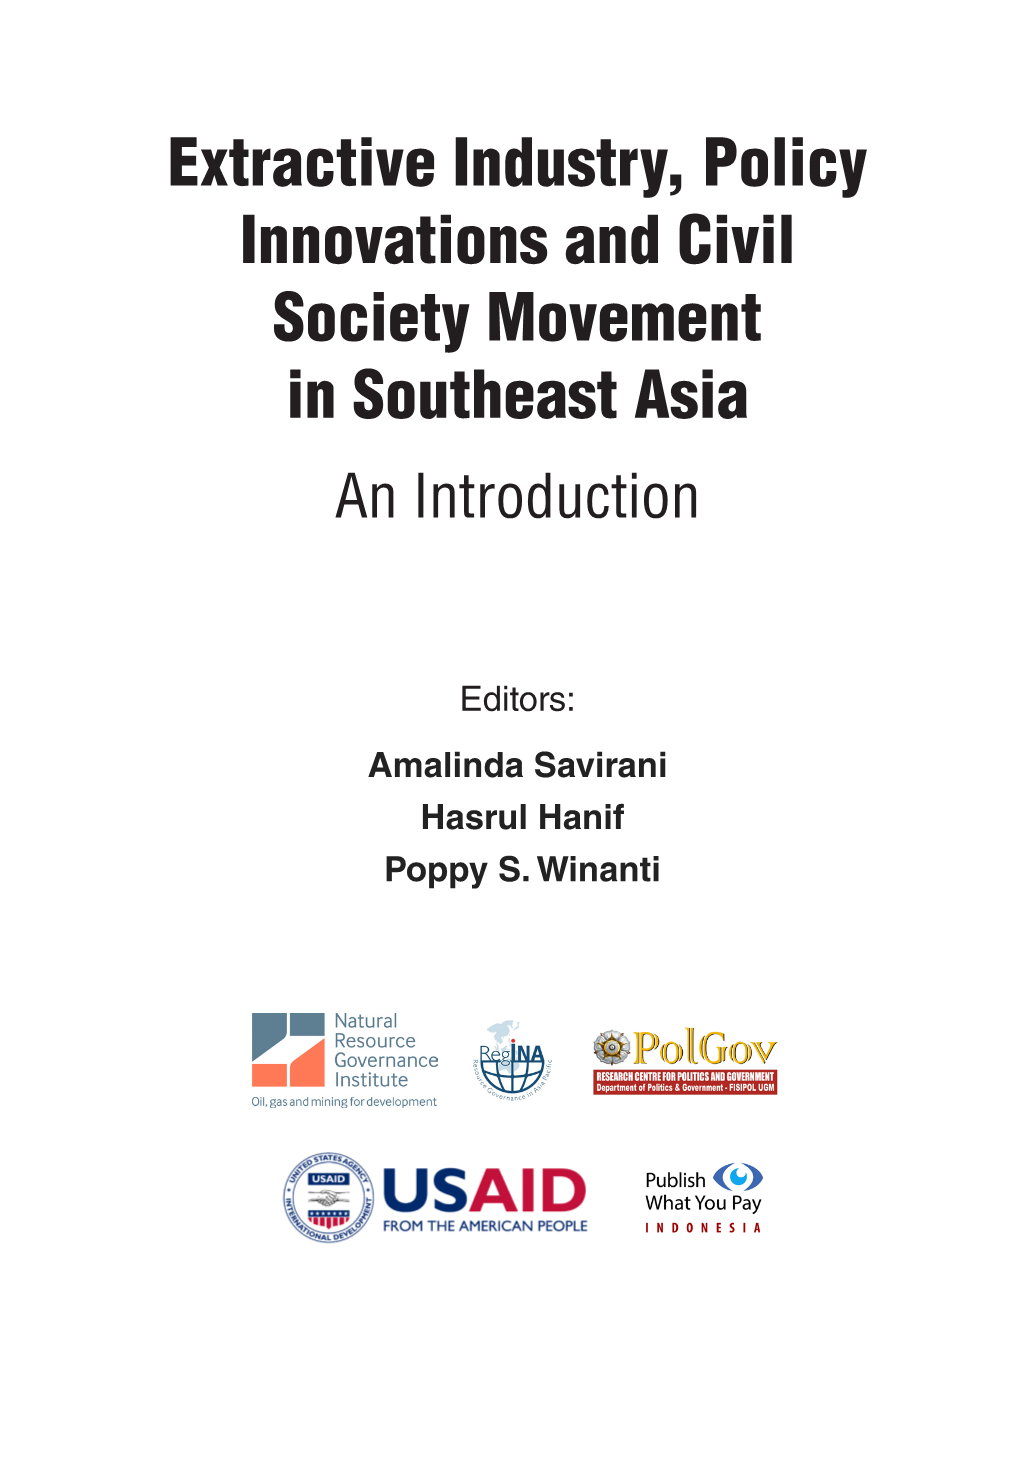 Extractive Industry, Policy Innovations and Civil Society Movement in Southeast Asia an Introduction